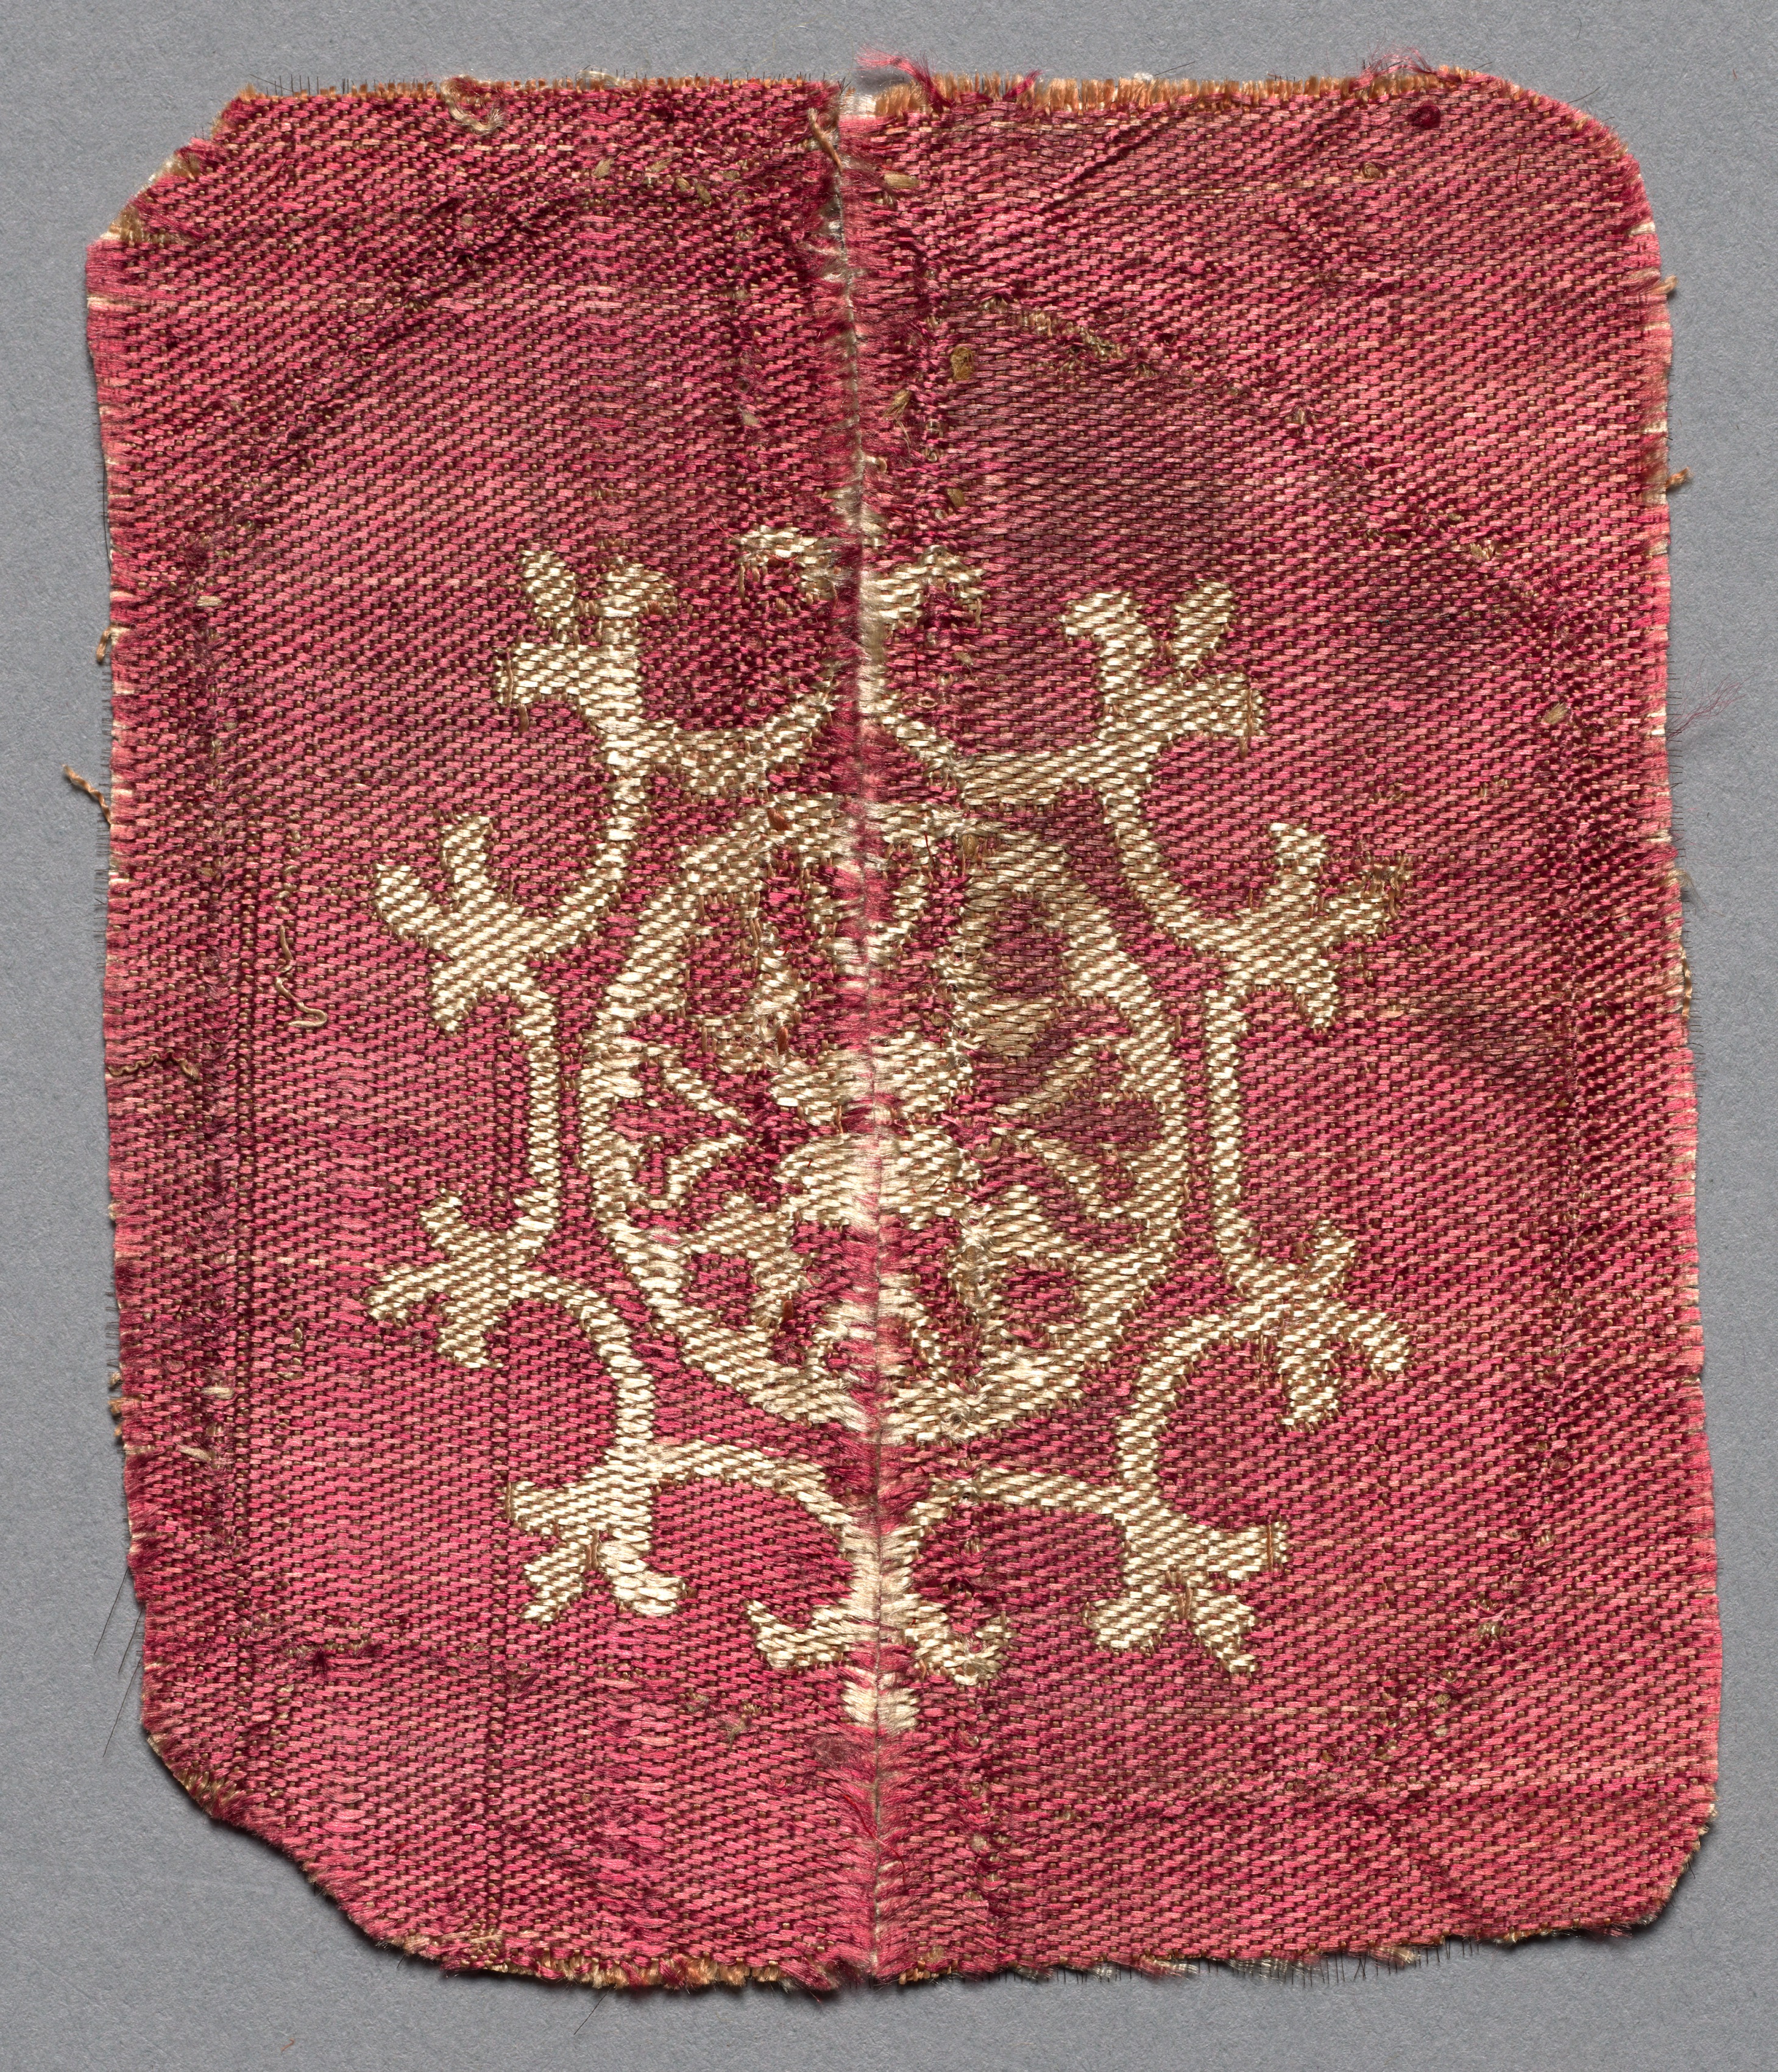 Ornament from a Tunic, Two Fragments Joined as One